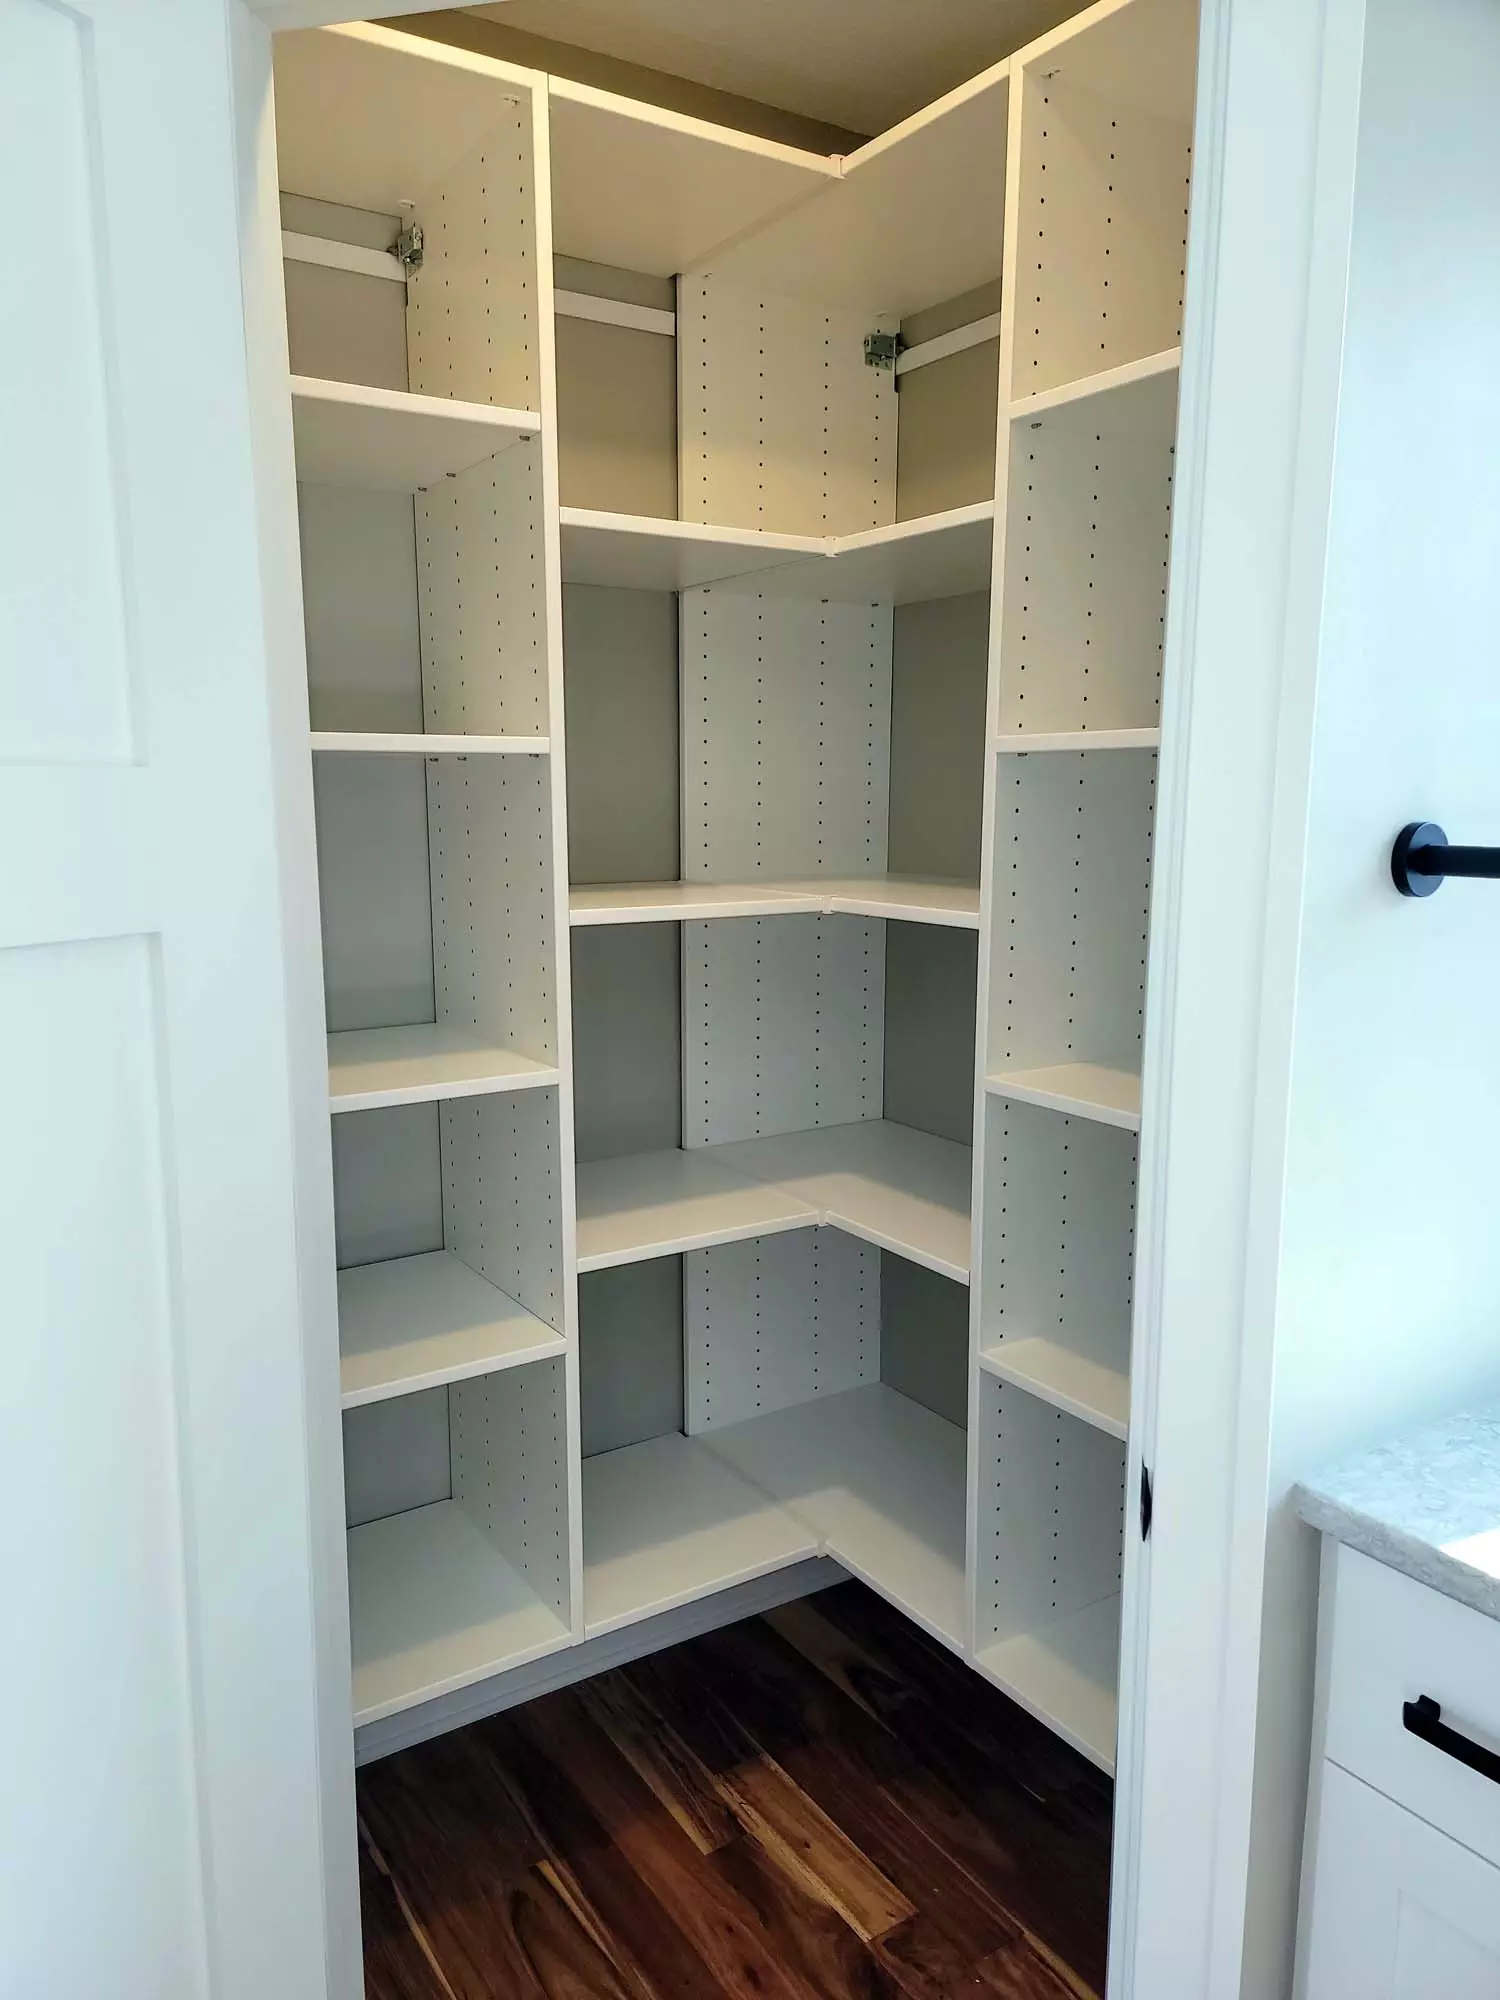 Walkin pantry with lots of built-in shelving